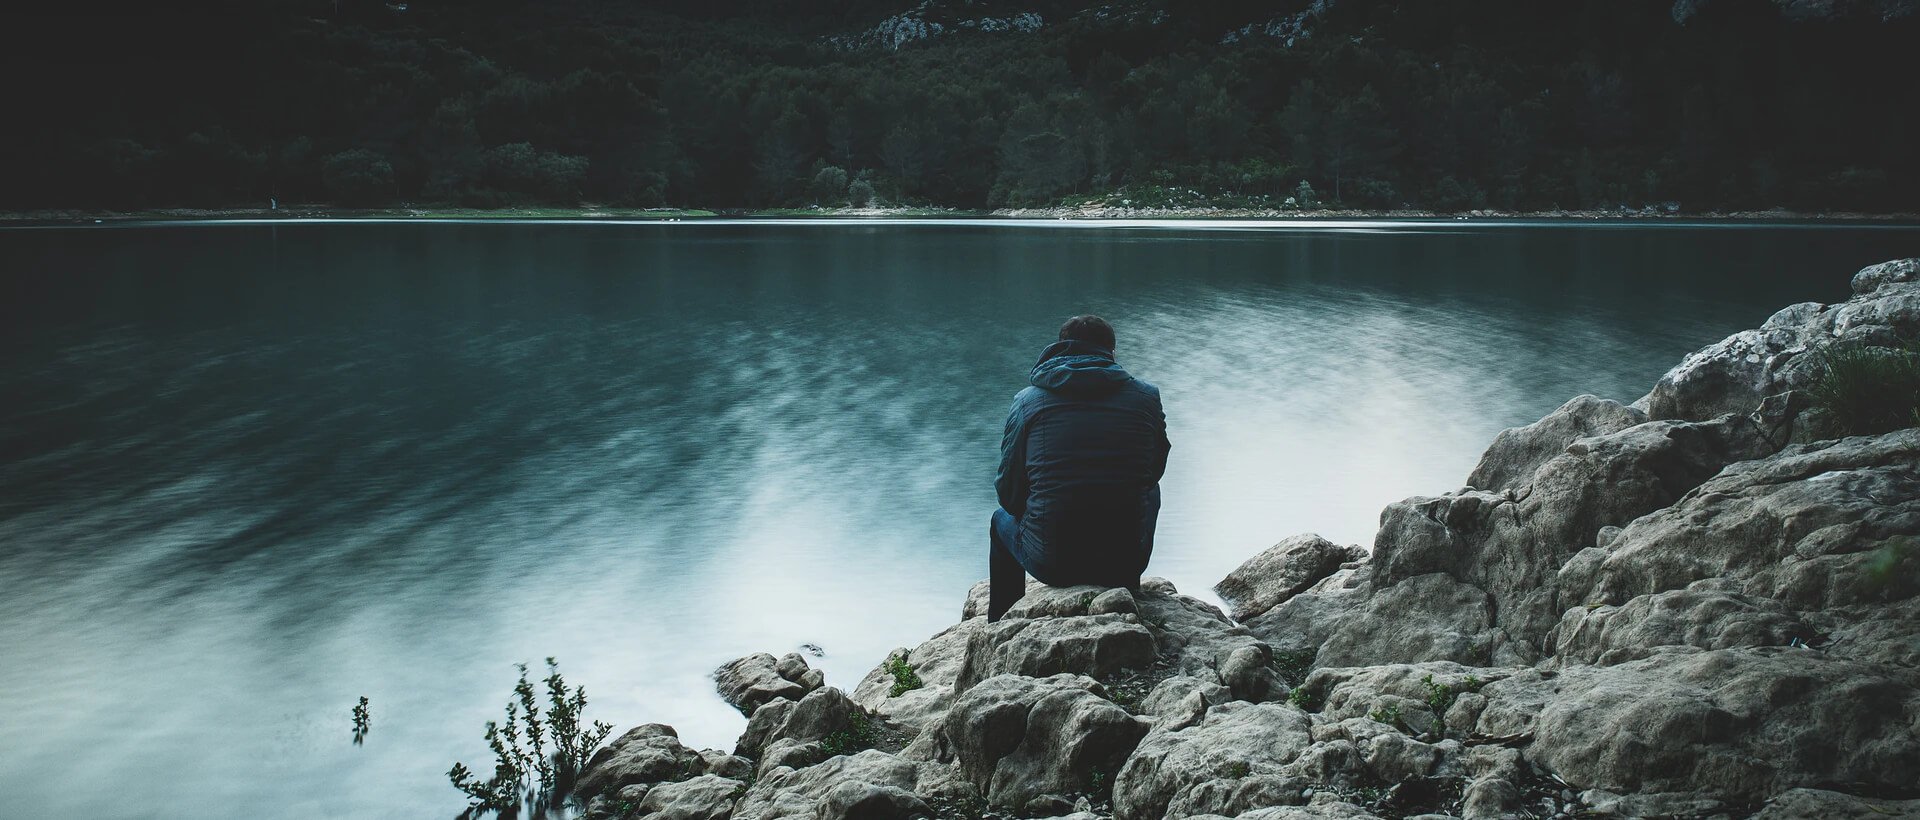 a person sitting on top of a rock next to a body of water.